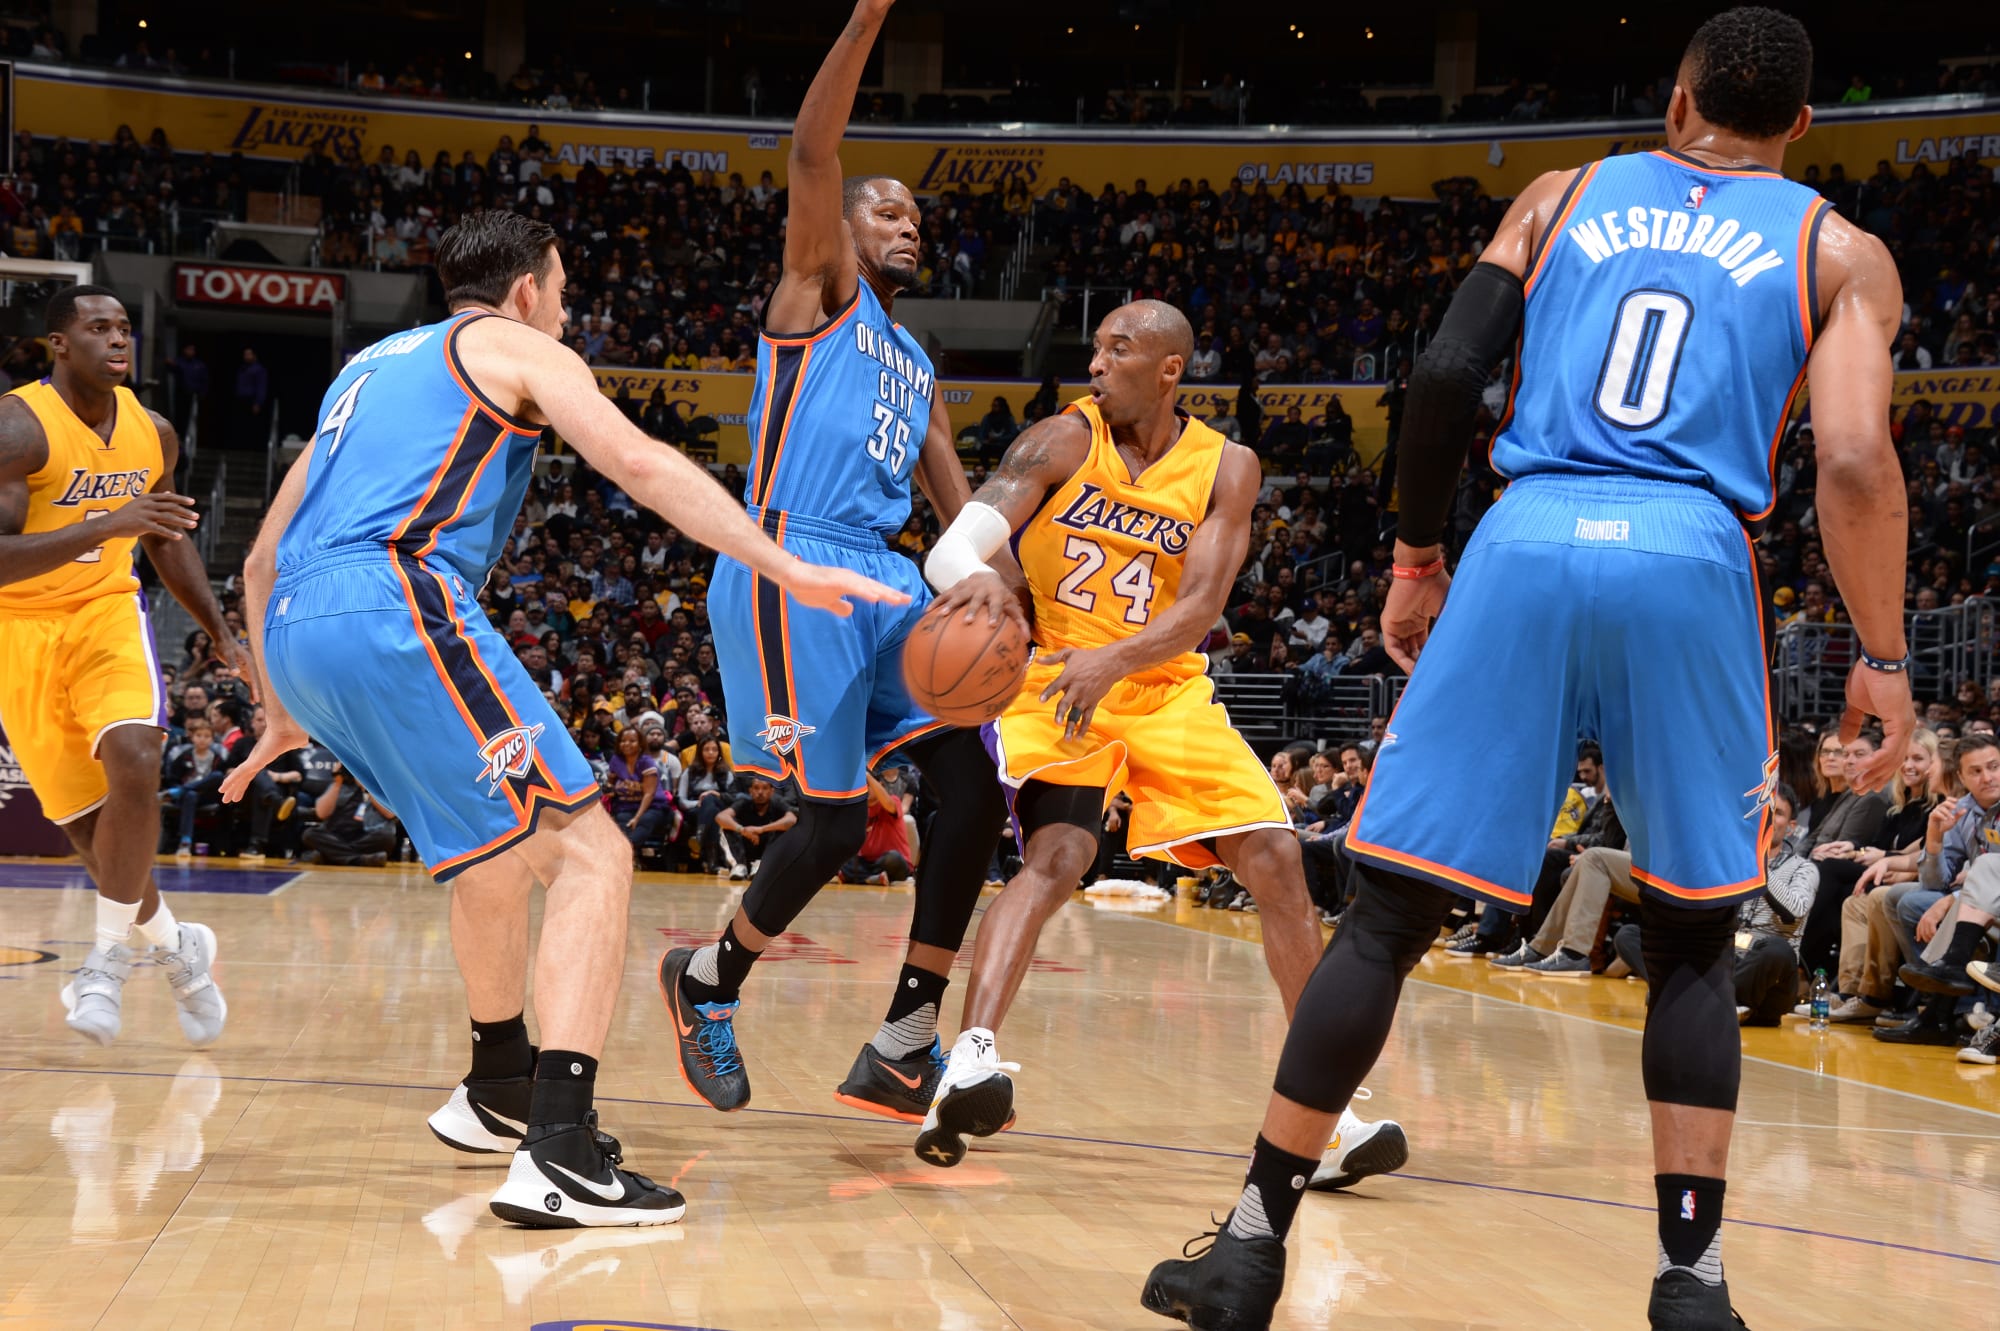 Kobe Bryant's on-court legacy 'intersected' with the Thunder's at